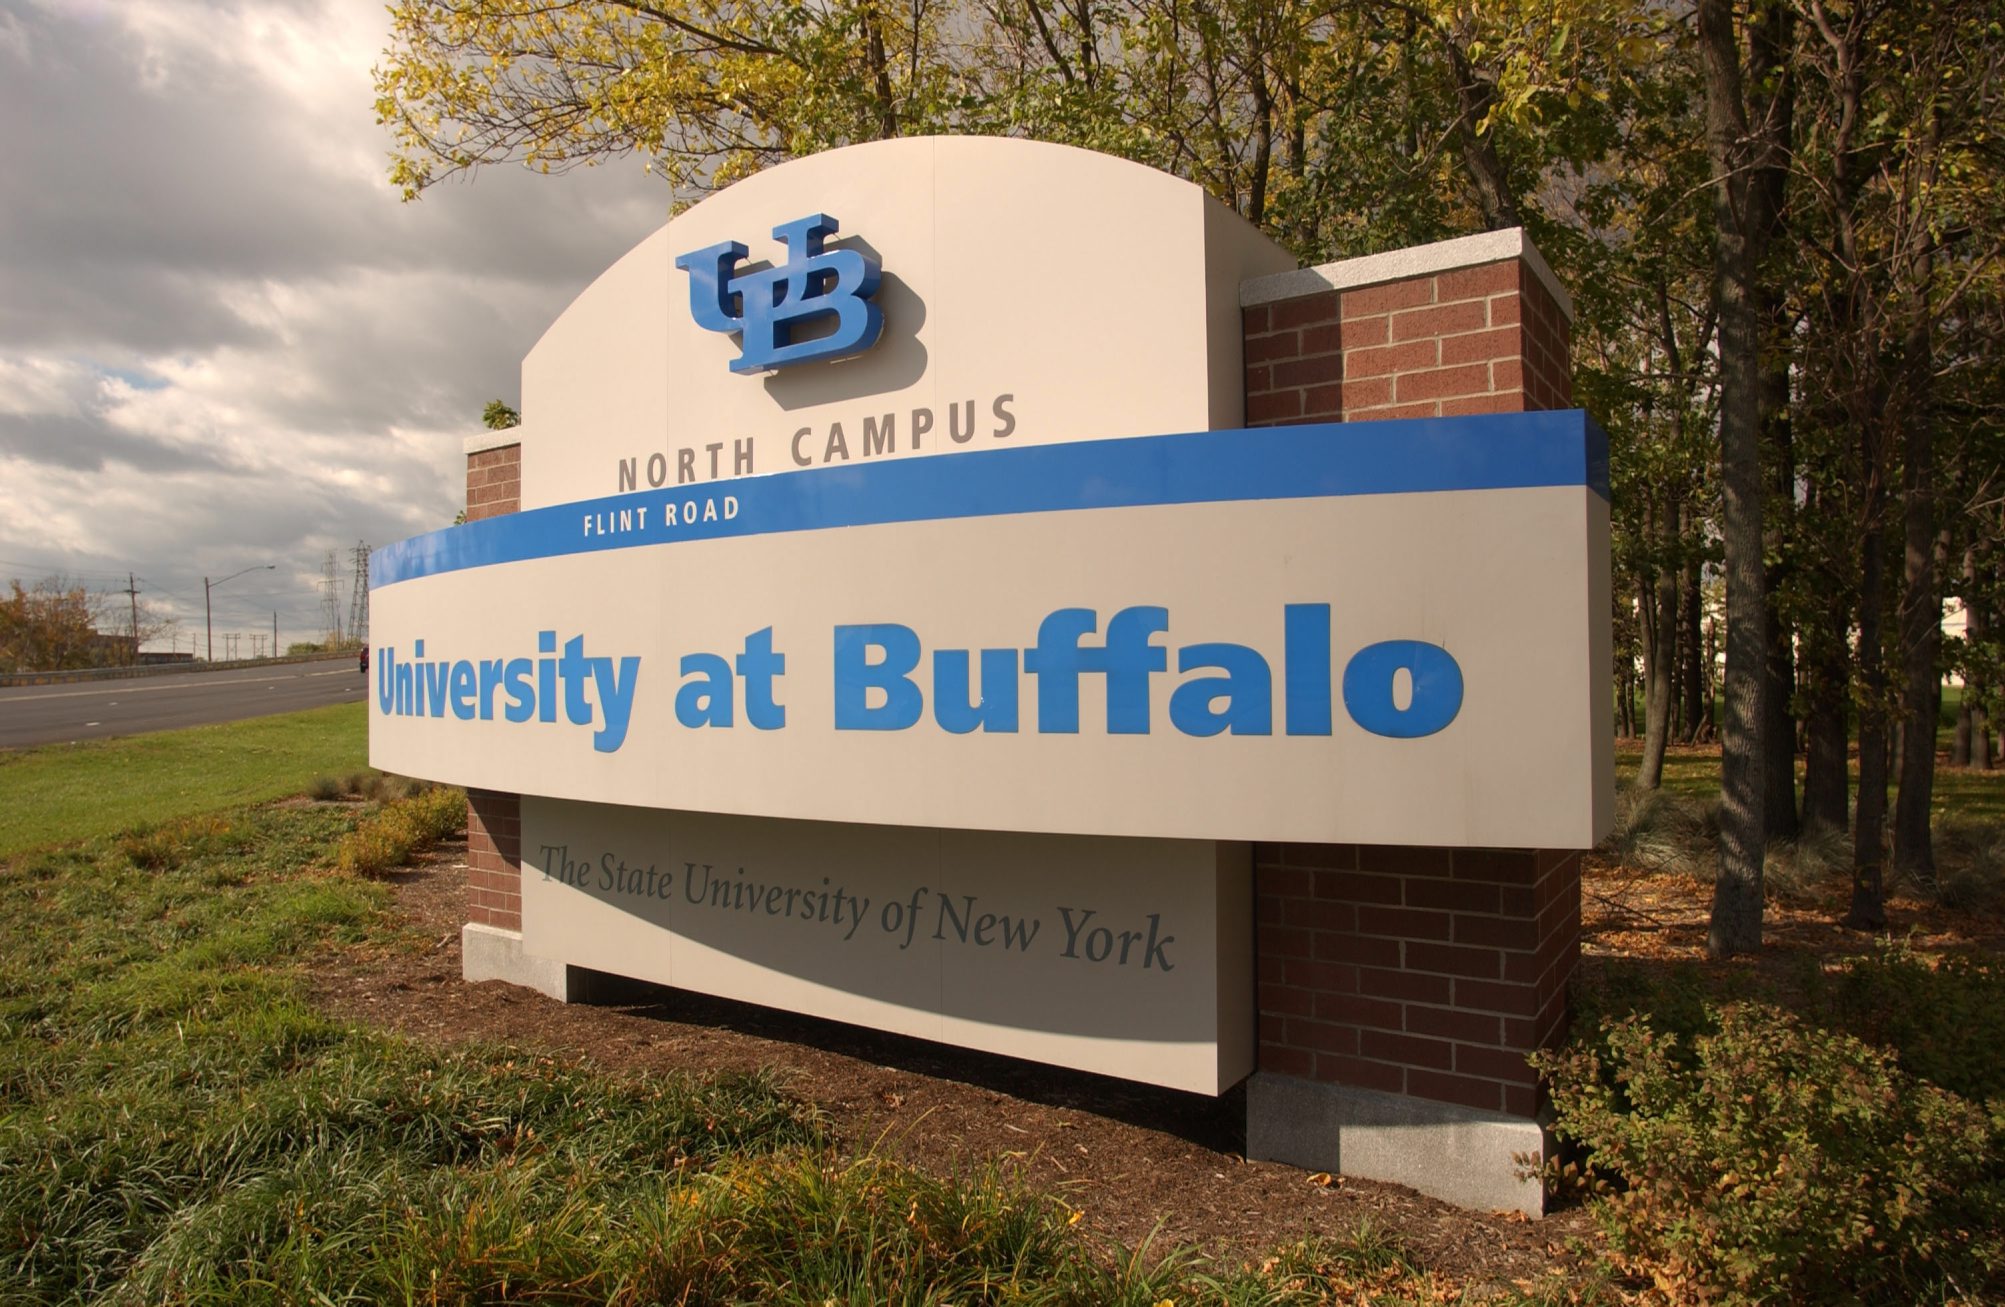 What to Bring to University at Buffalo: The Move In Day Packing List